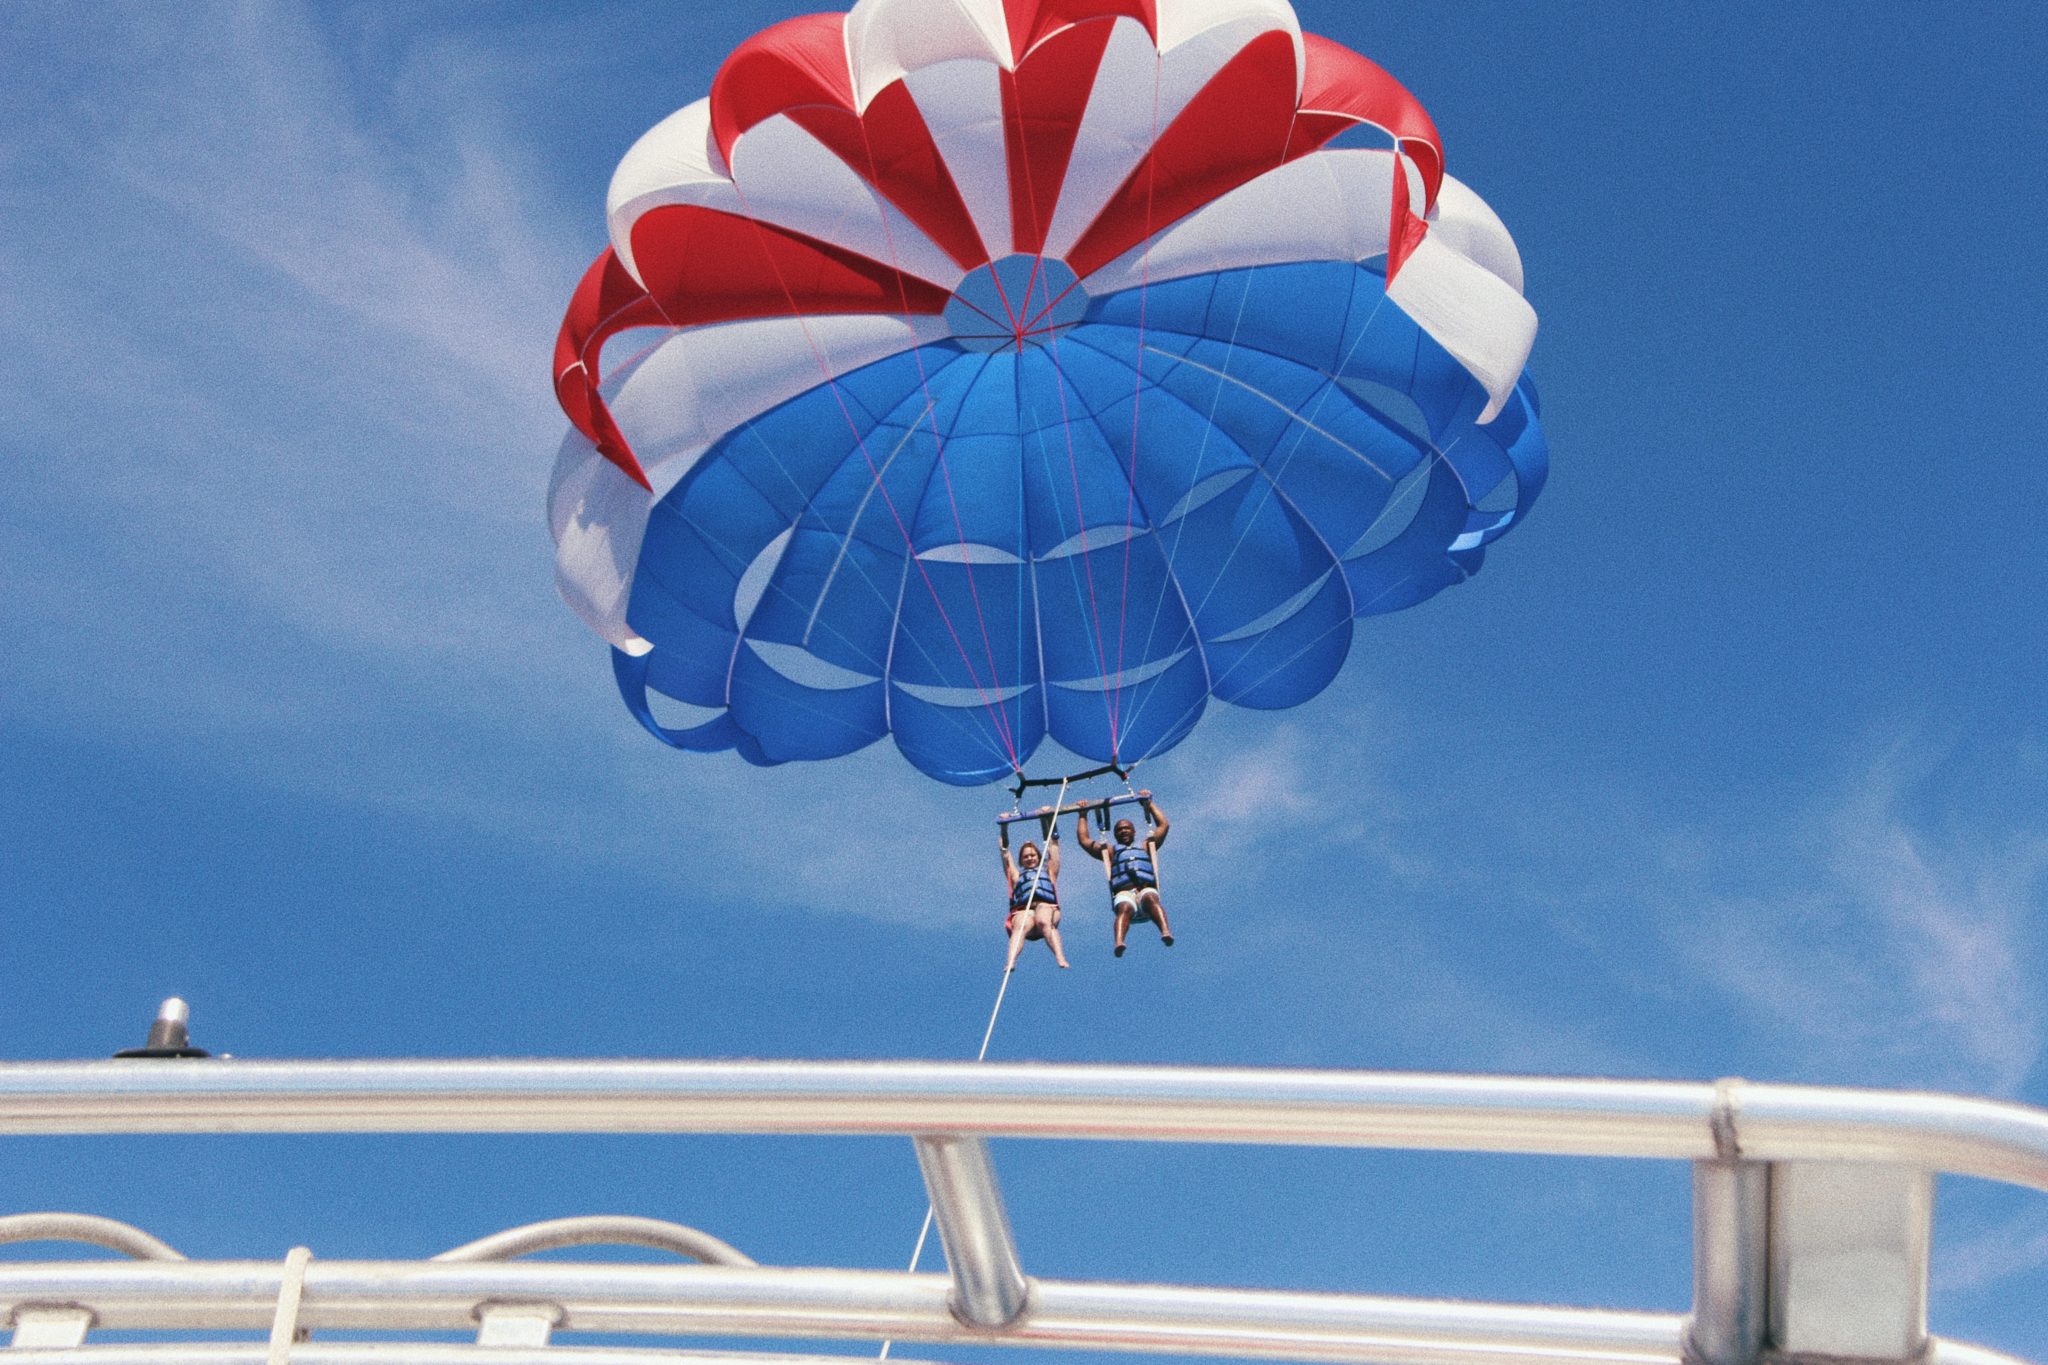 Parasailing in Myrtle Beach, SC: An Exhilarating Experience